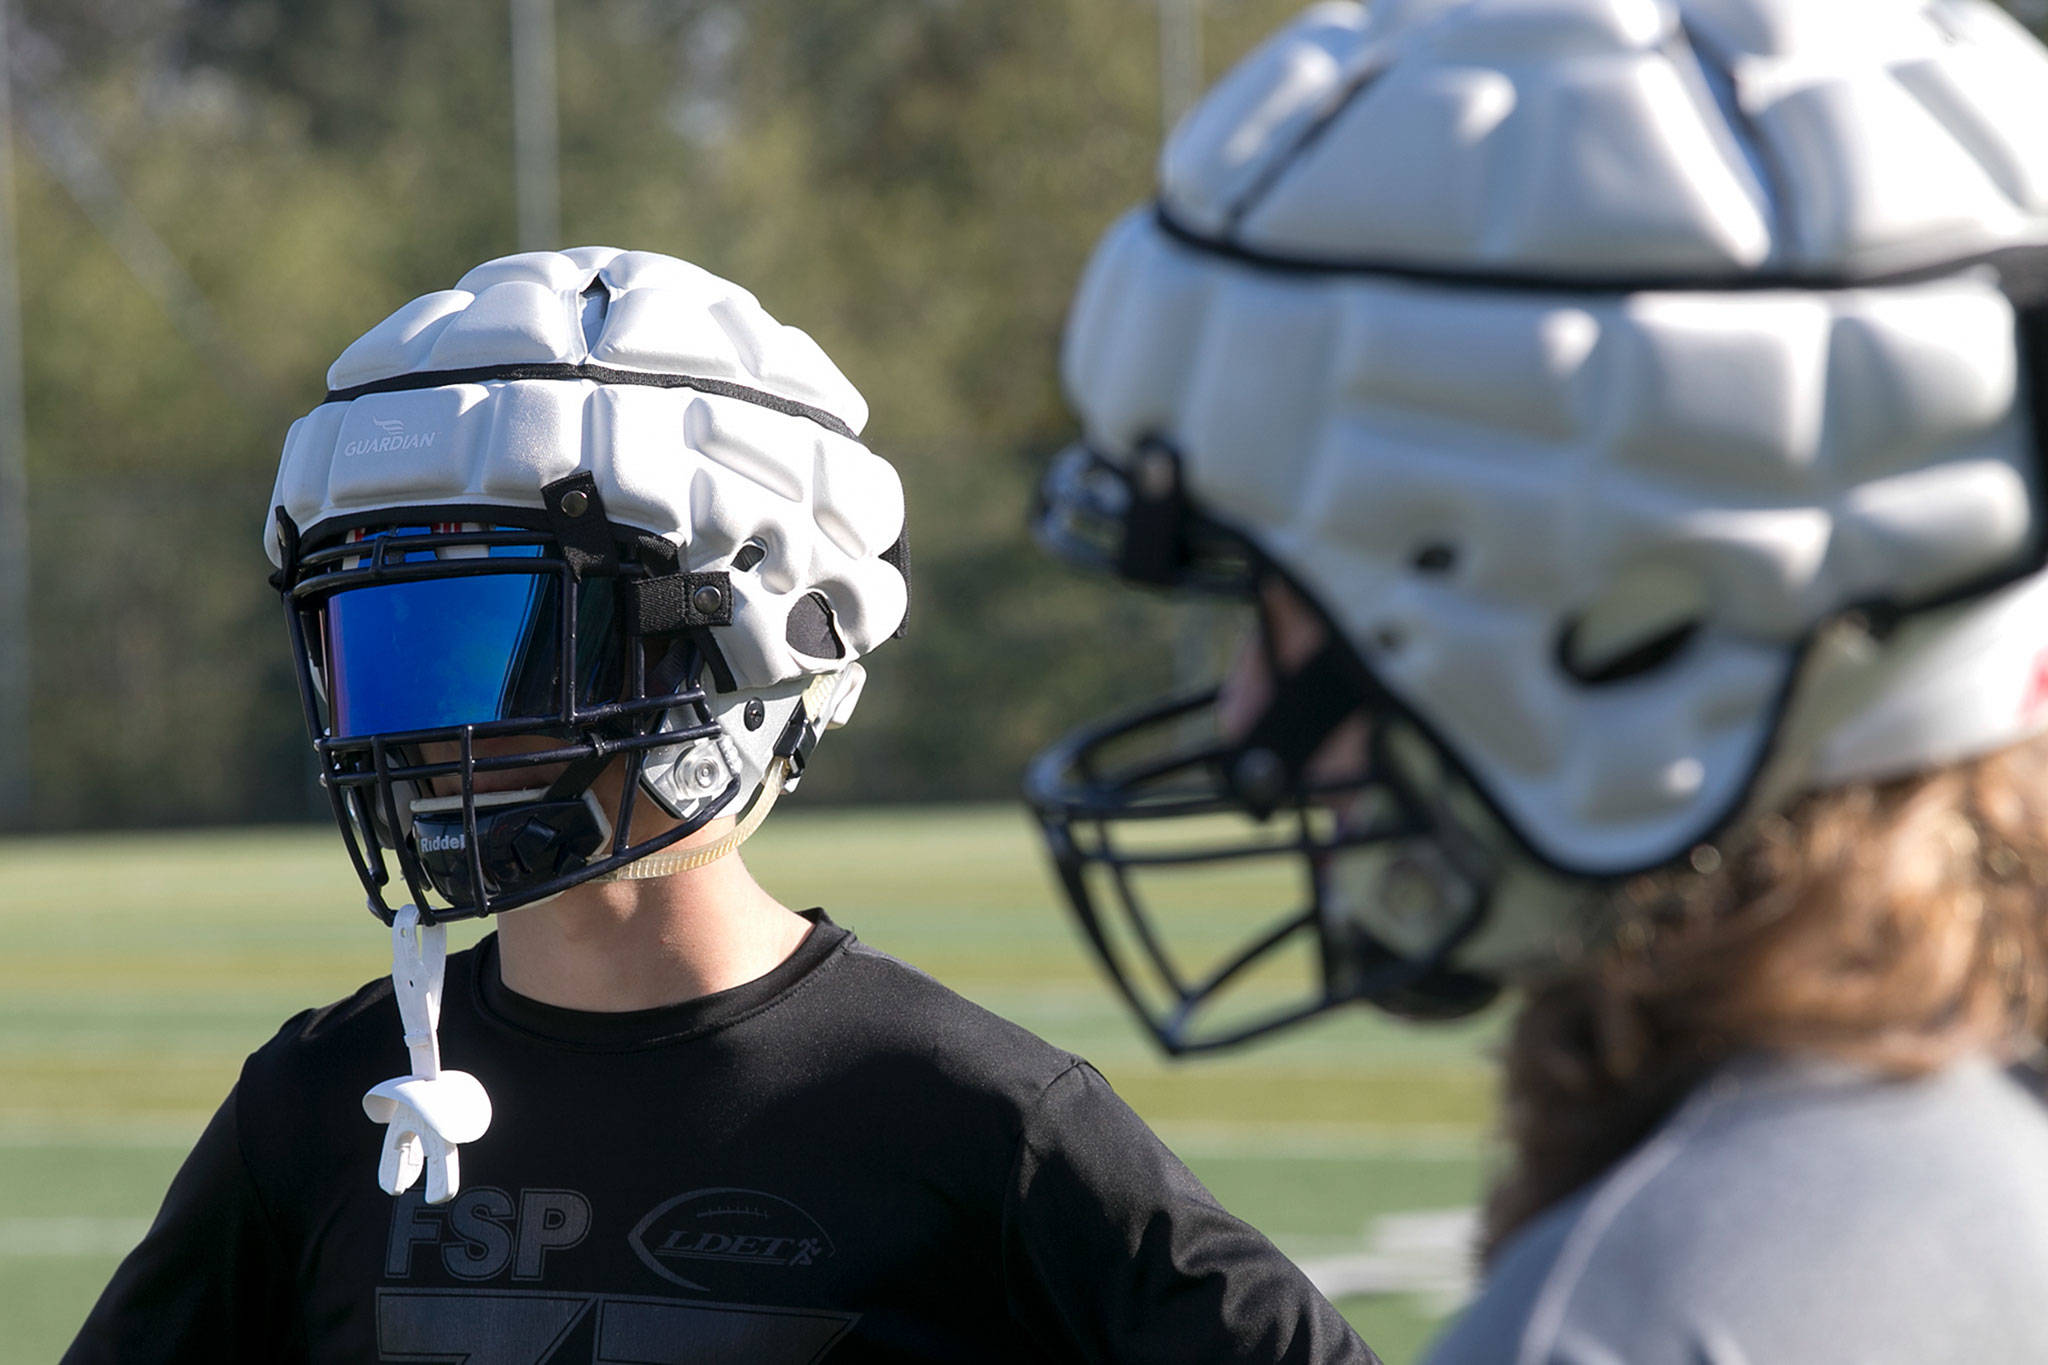 A face mask adds to the alien look as a pair of football players wear Guardian Caps on their helmets Thursday afternoon during practice at Glacier Peak High School in Snohomish on October 4, 2018. (Kevin Clark / The Herald)